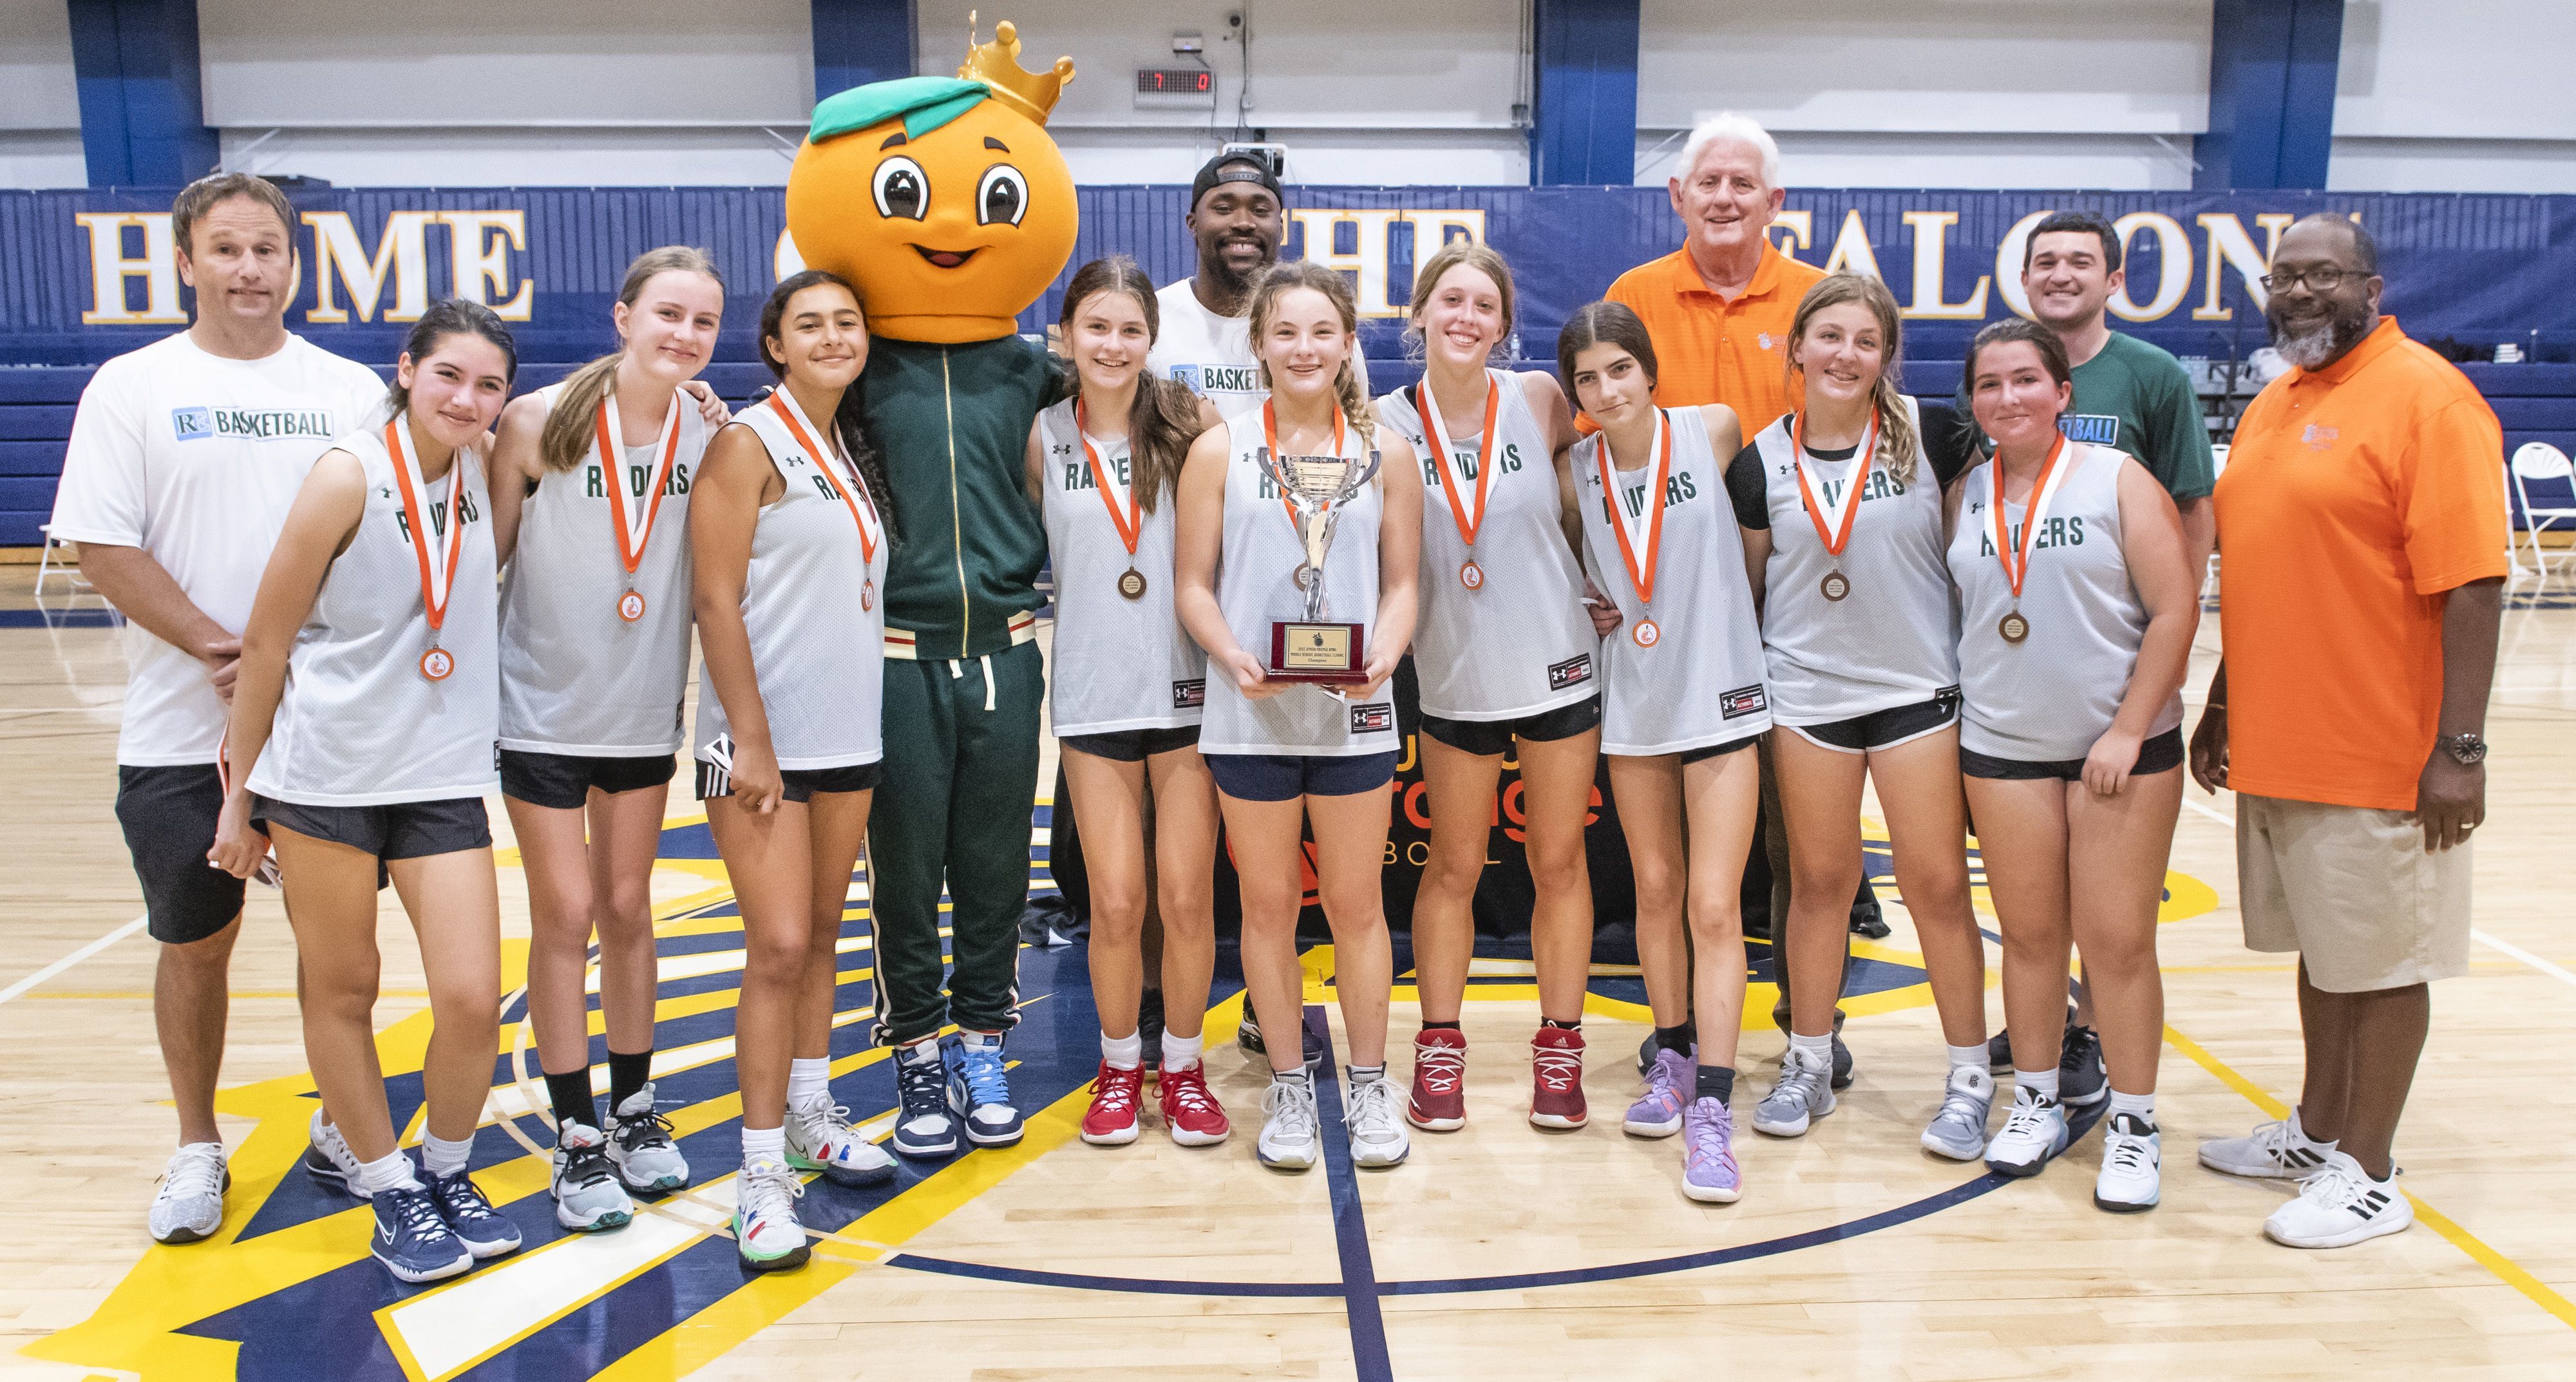 Ransom Everglades takes the Girls' Middle School Basketball Classic Championship